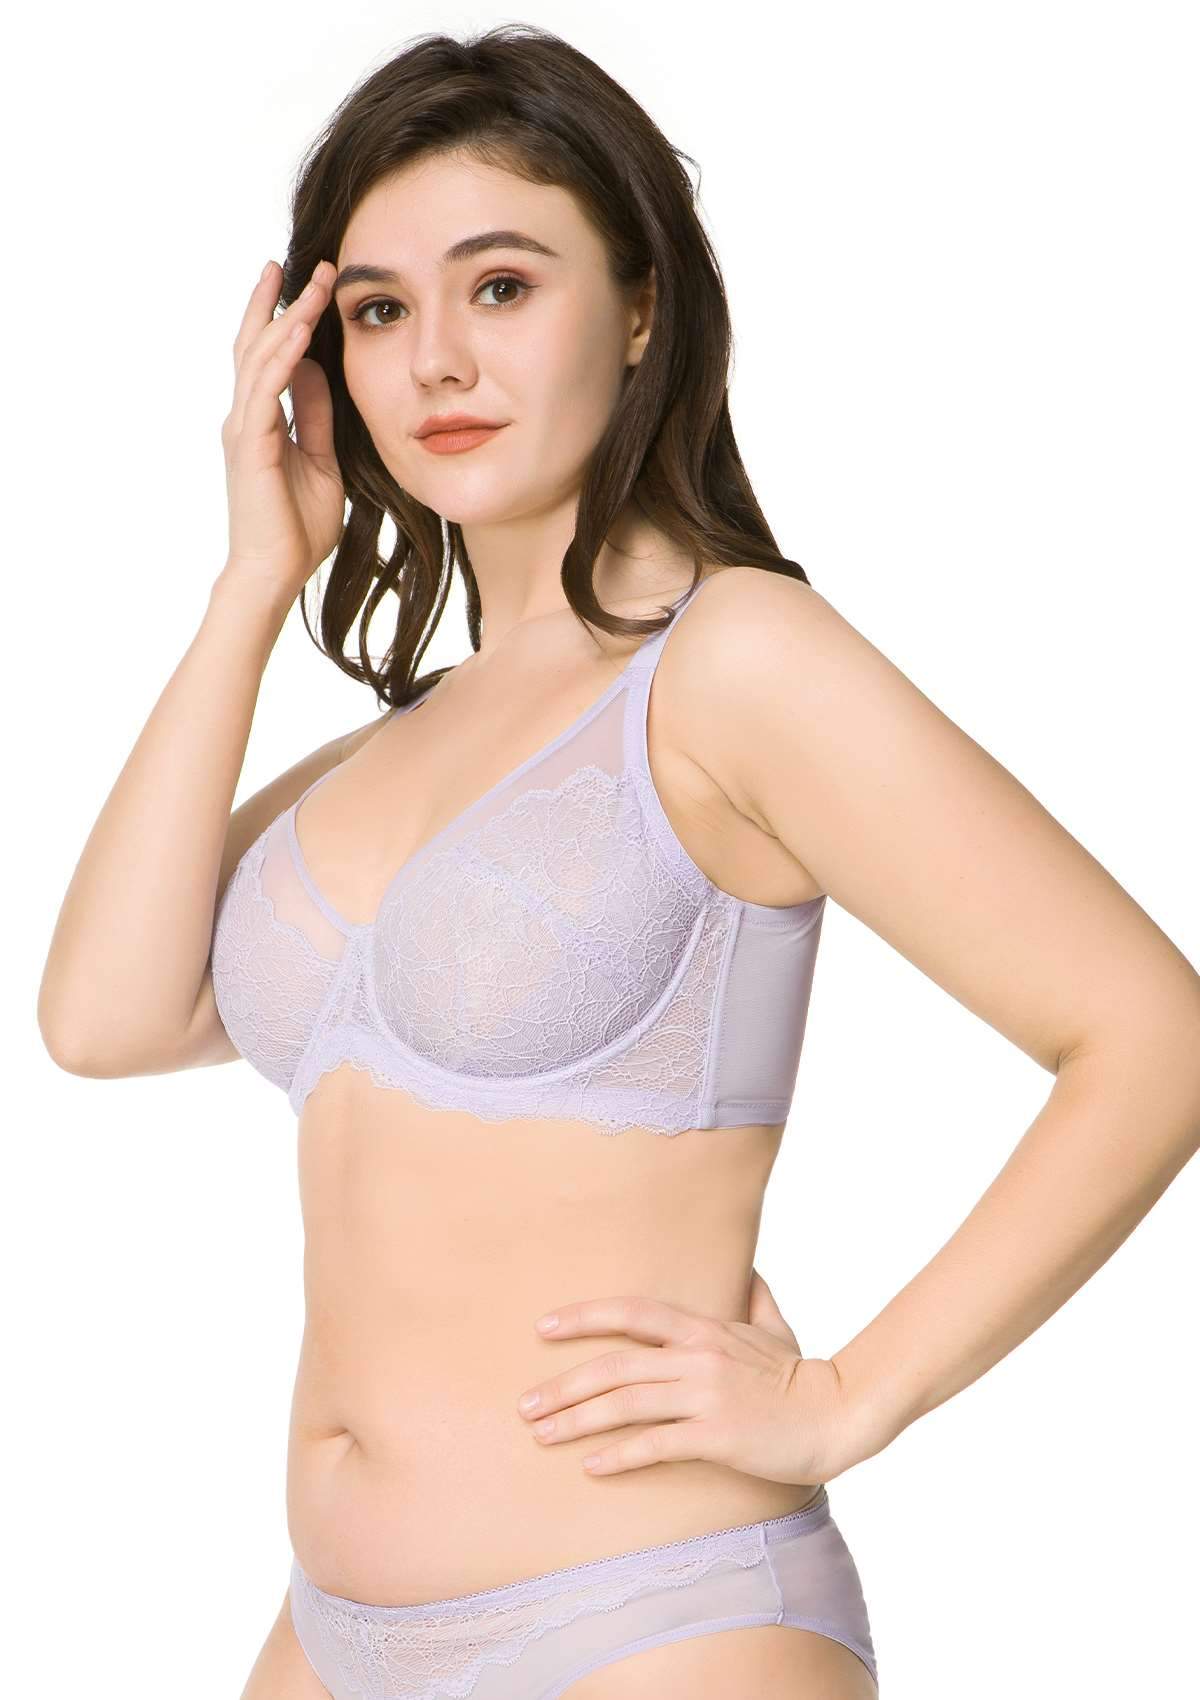 HSIA Wisteria Bra For Lift And Support - Full Coverage Minimizer Bra - Light Pink / 34 / DDD/F